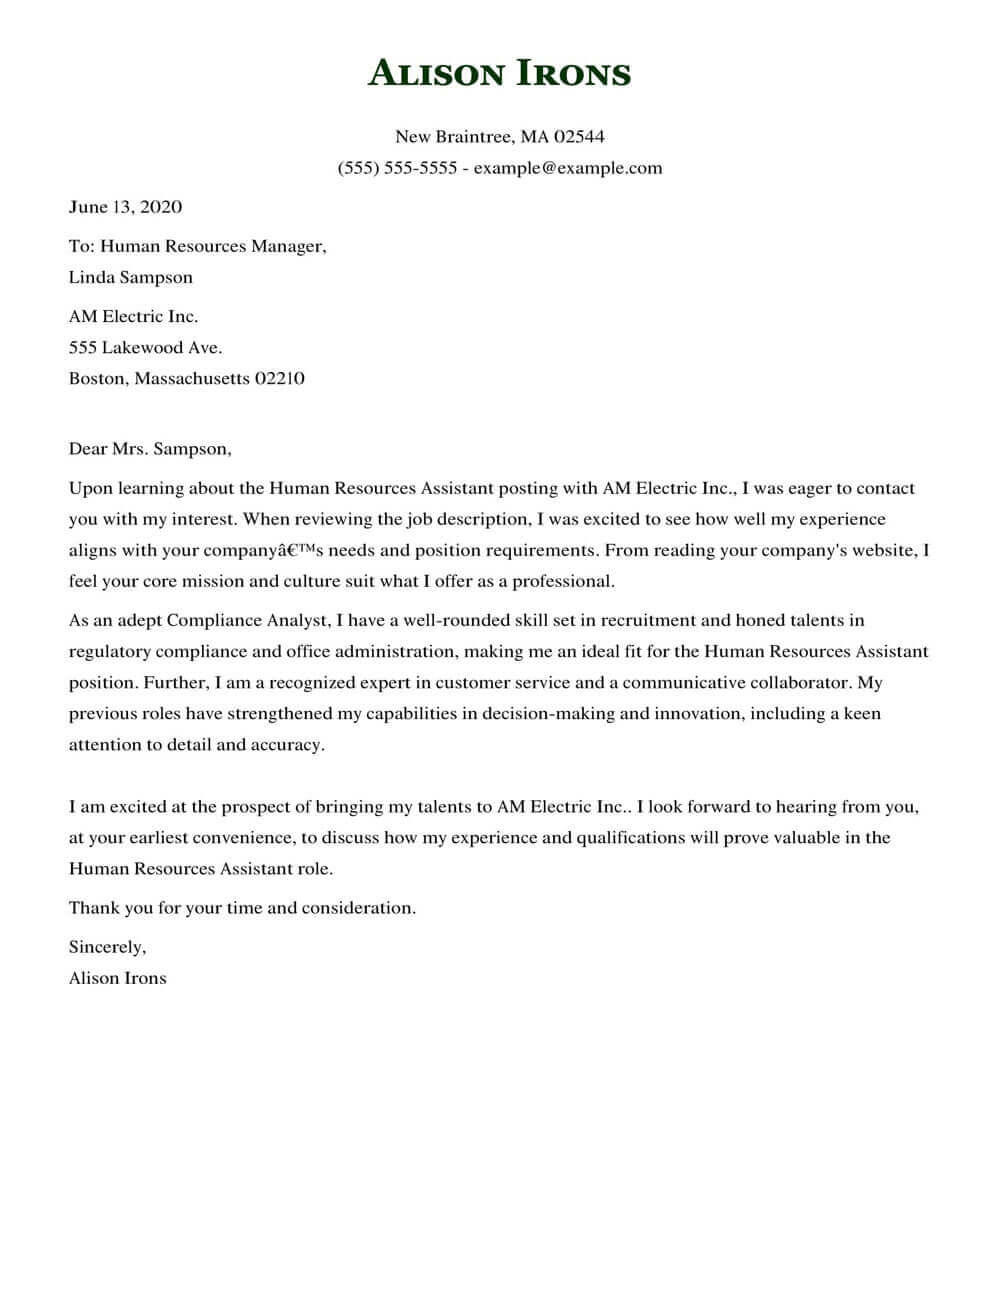 sample cover letter for human resources job application